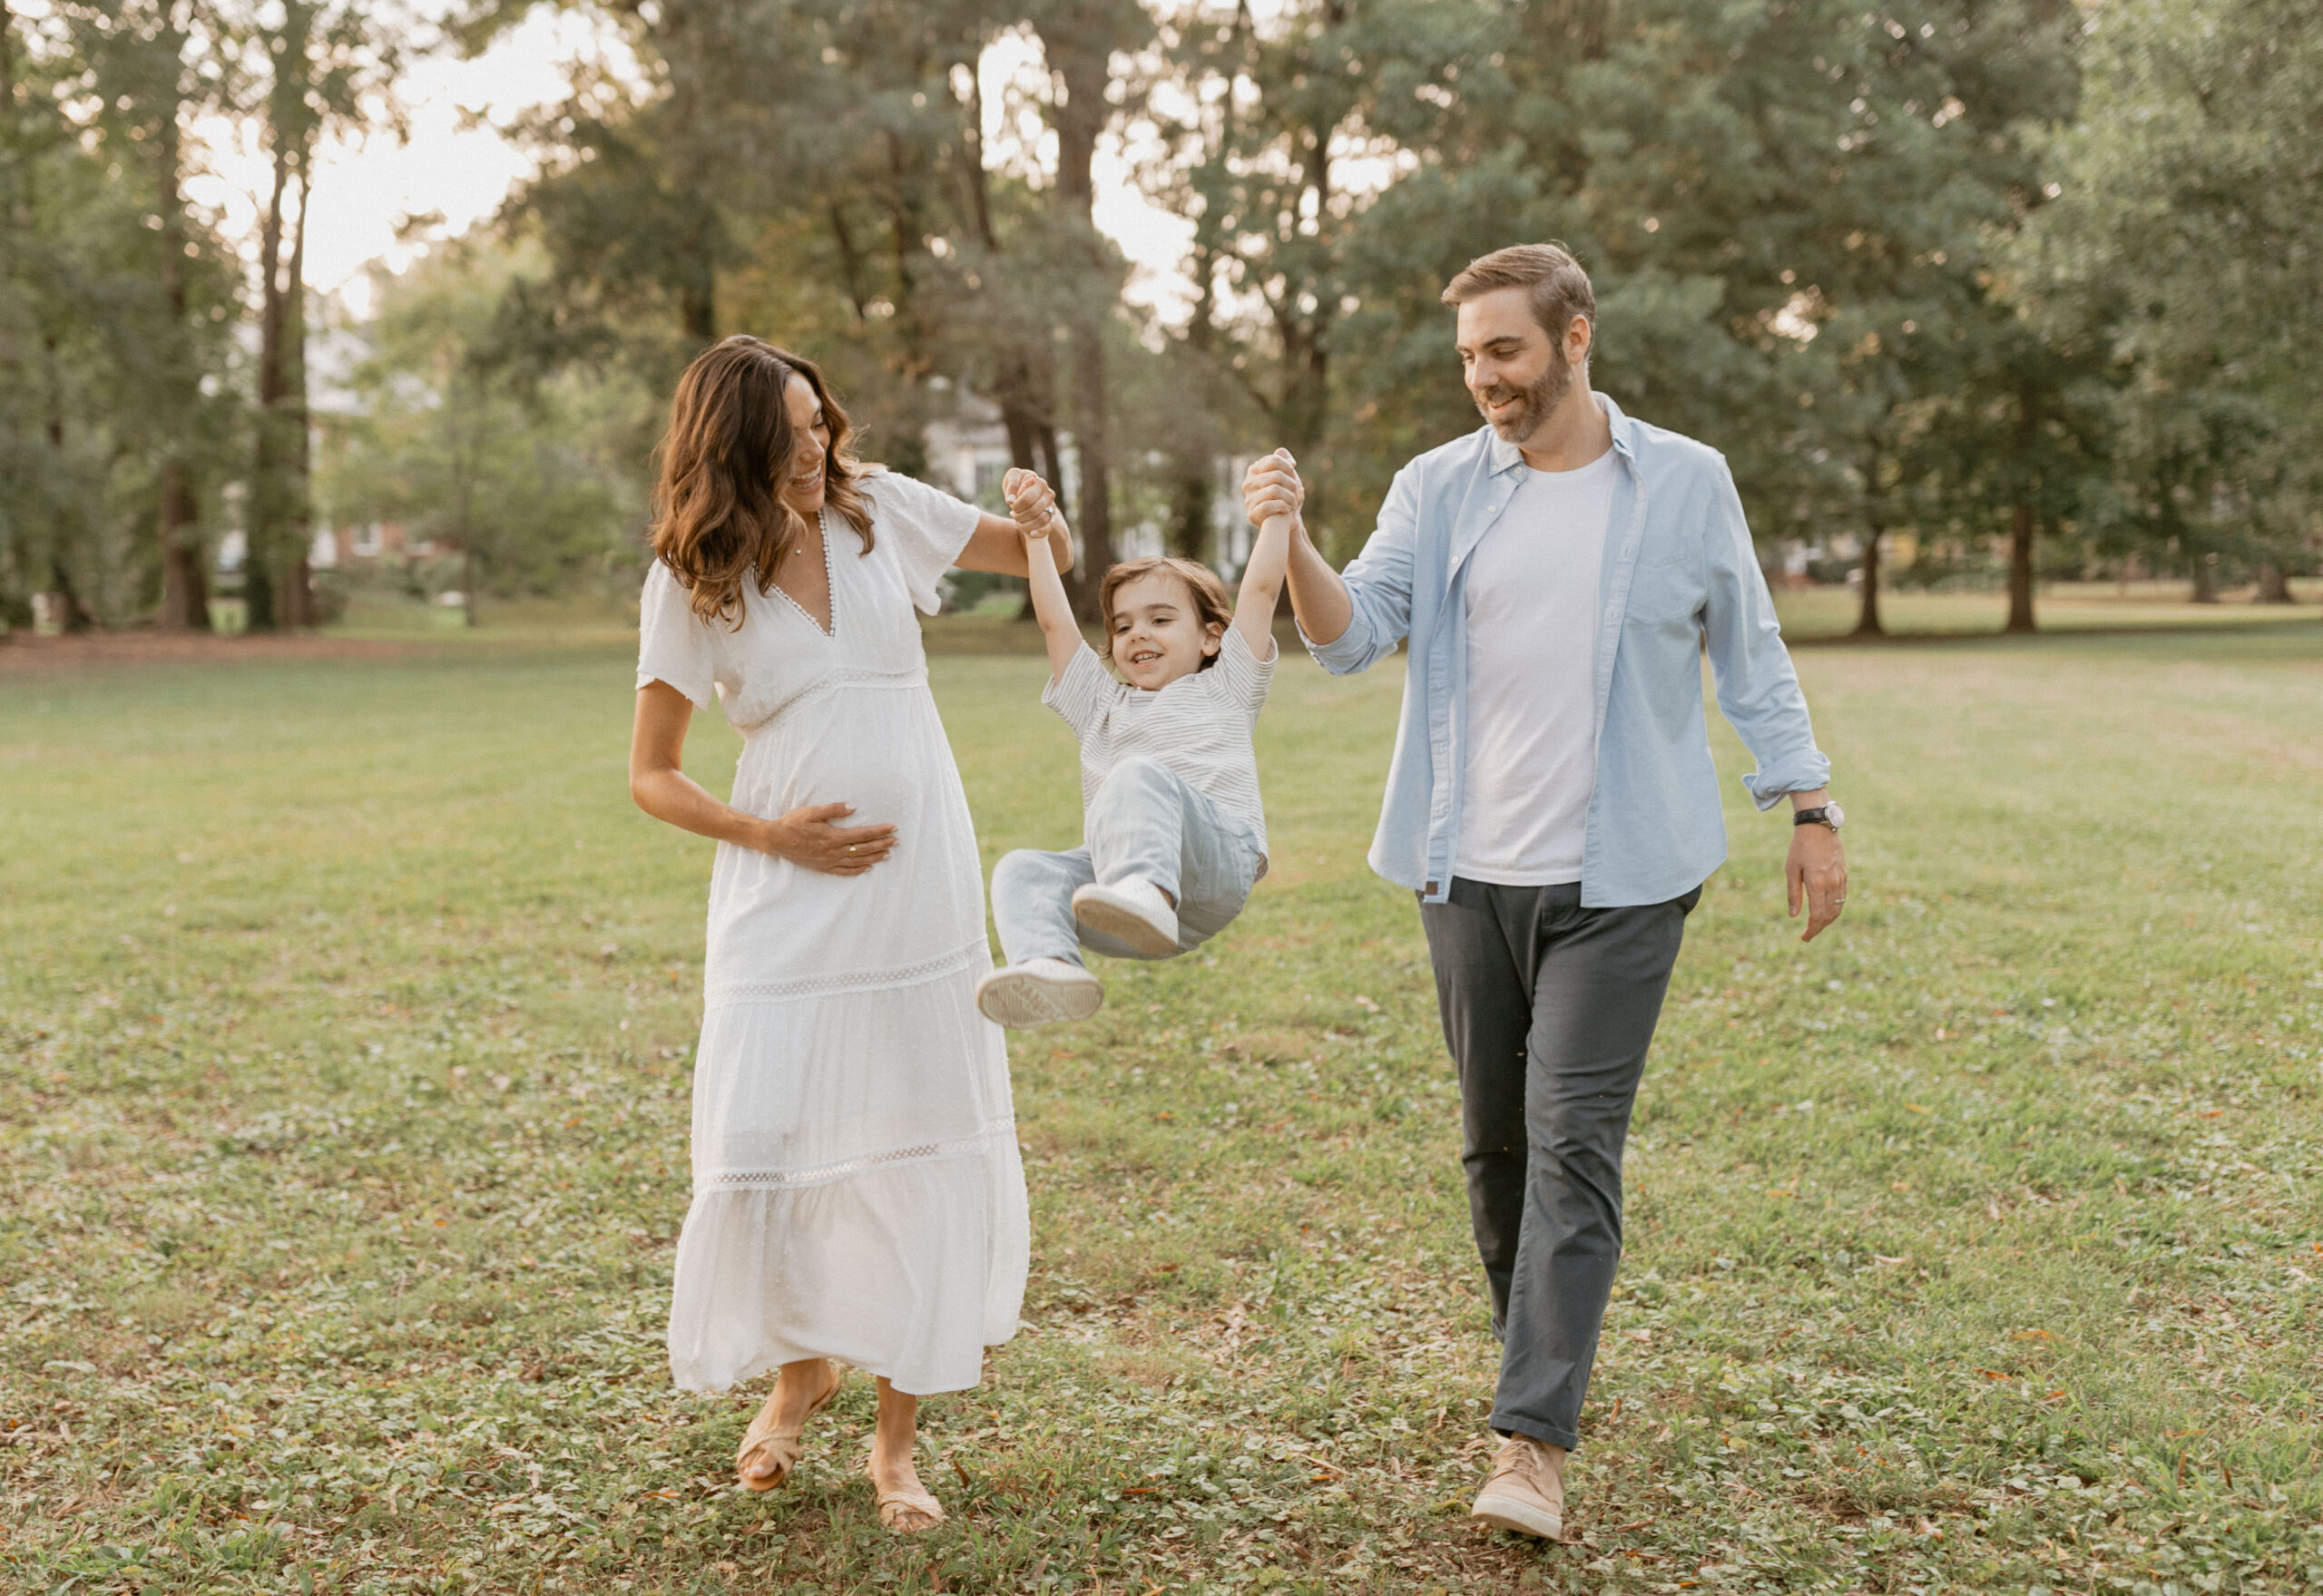 Playful Family Session | Charlotte, NC